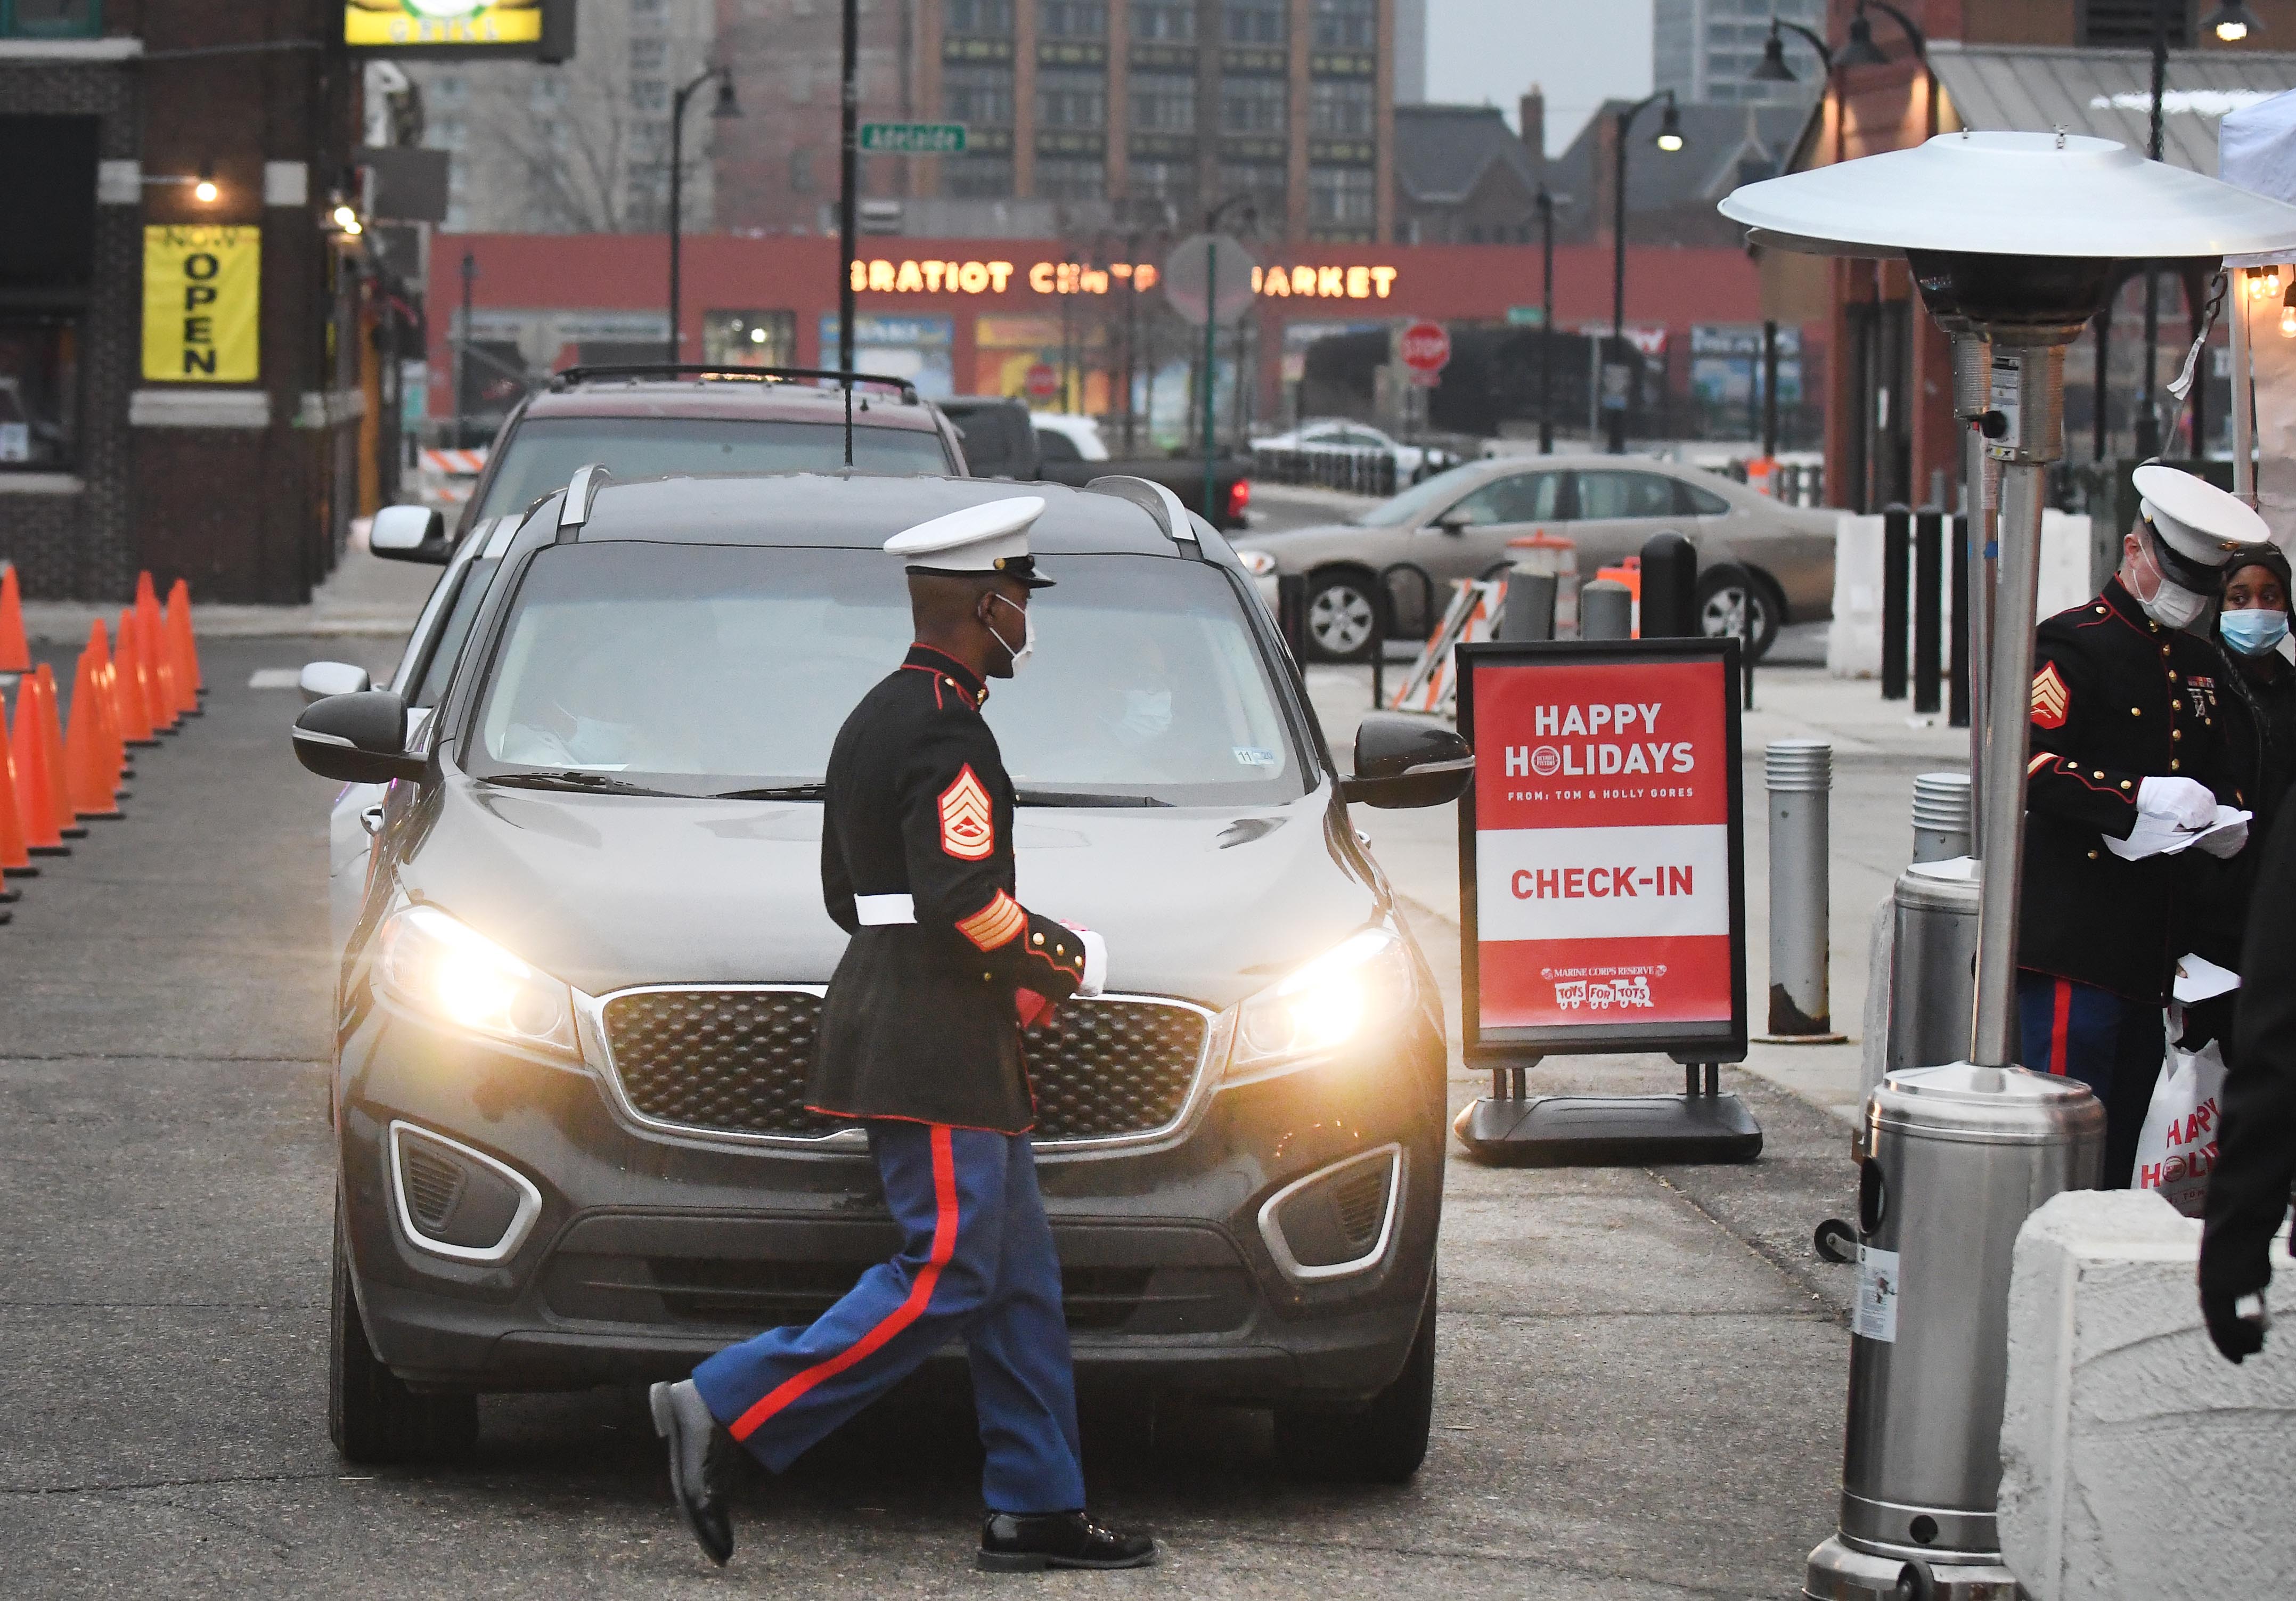 Marines and volunteers of the Marine Corps Reserve Toys for Tots program check in cars in line for a drive-through toy pickup in Eastern Market.